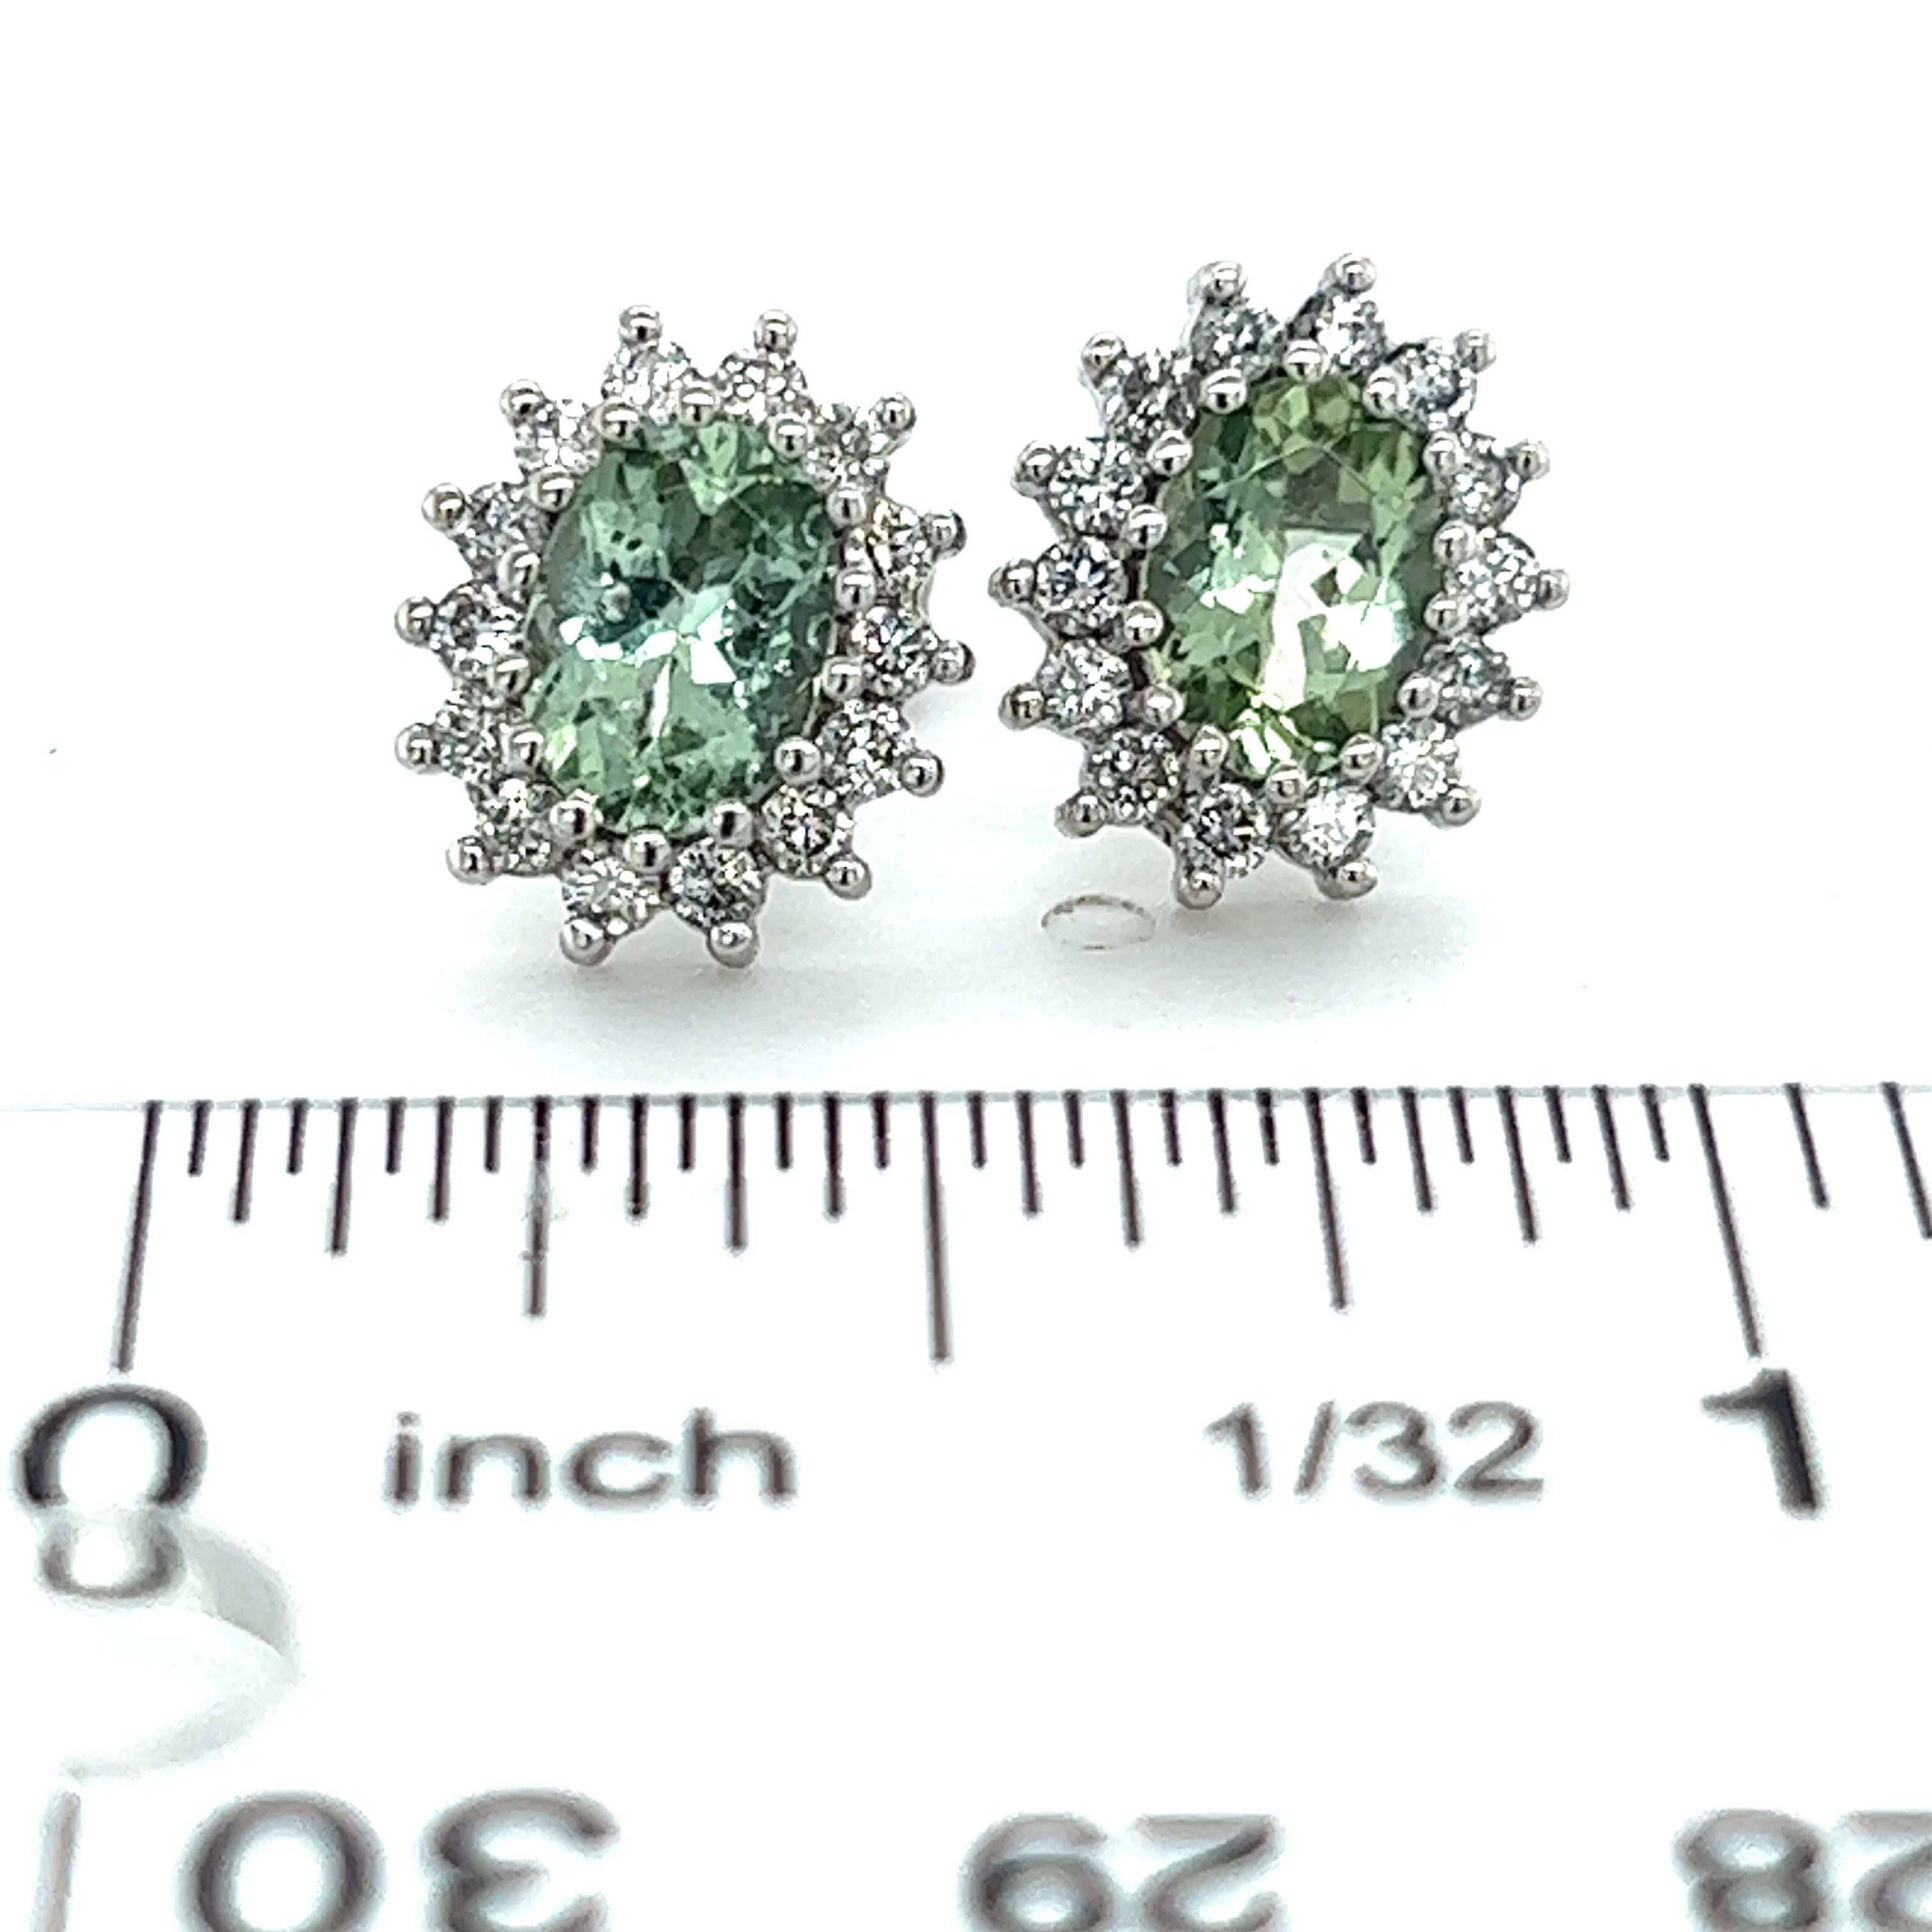 Natural Tourmaline Diamond Stud Earrings 14k W Gold 2.42 TCW Certified $3,950 215090

Nothing says, “I Love you” more than Diamonds and Pearls!

These Tourmaline earrings have been Certified, Inspected, and Appraised by Gemological Appraisal